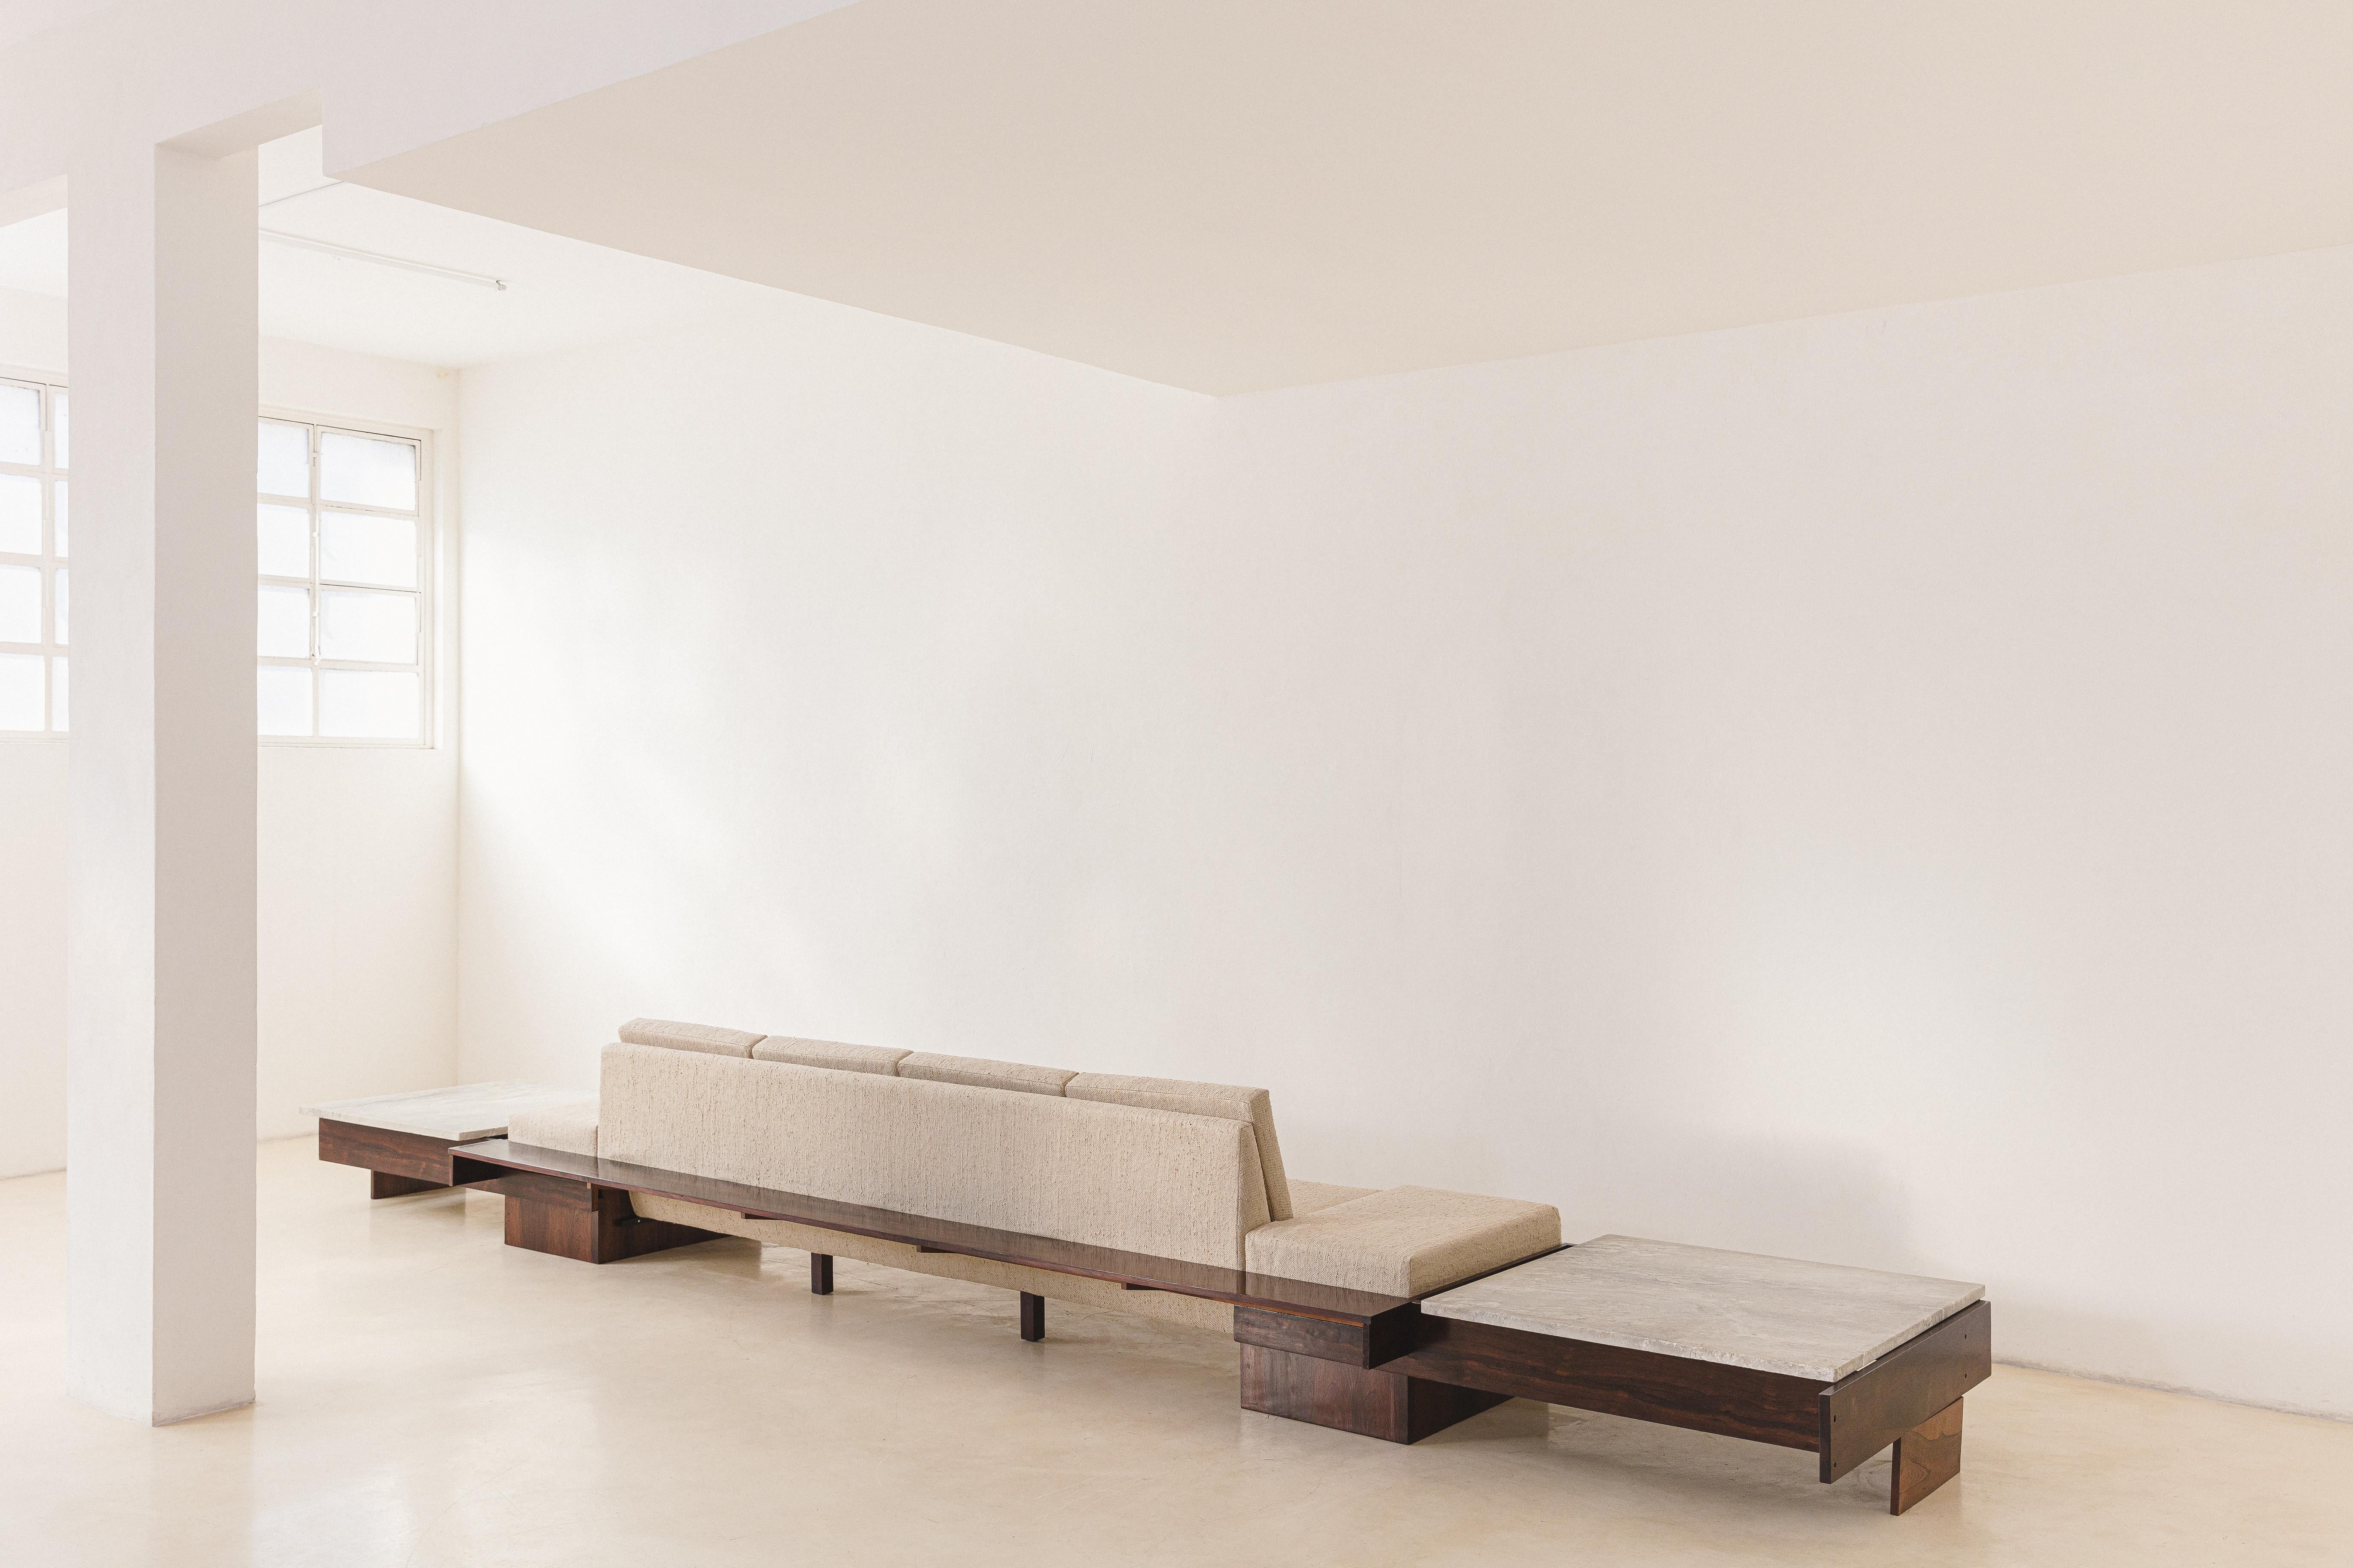 Midcentury Brazilian Sofa Design by Joaquim Tenreiro, Rosewood and Marble, 1960s For Sale 8